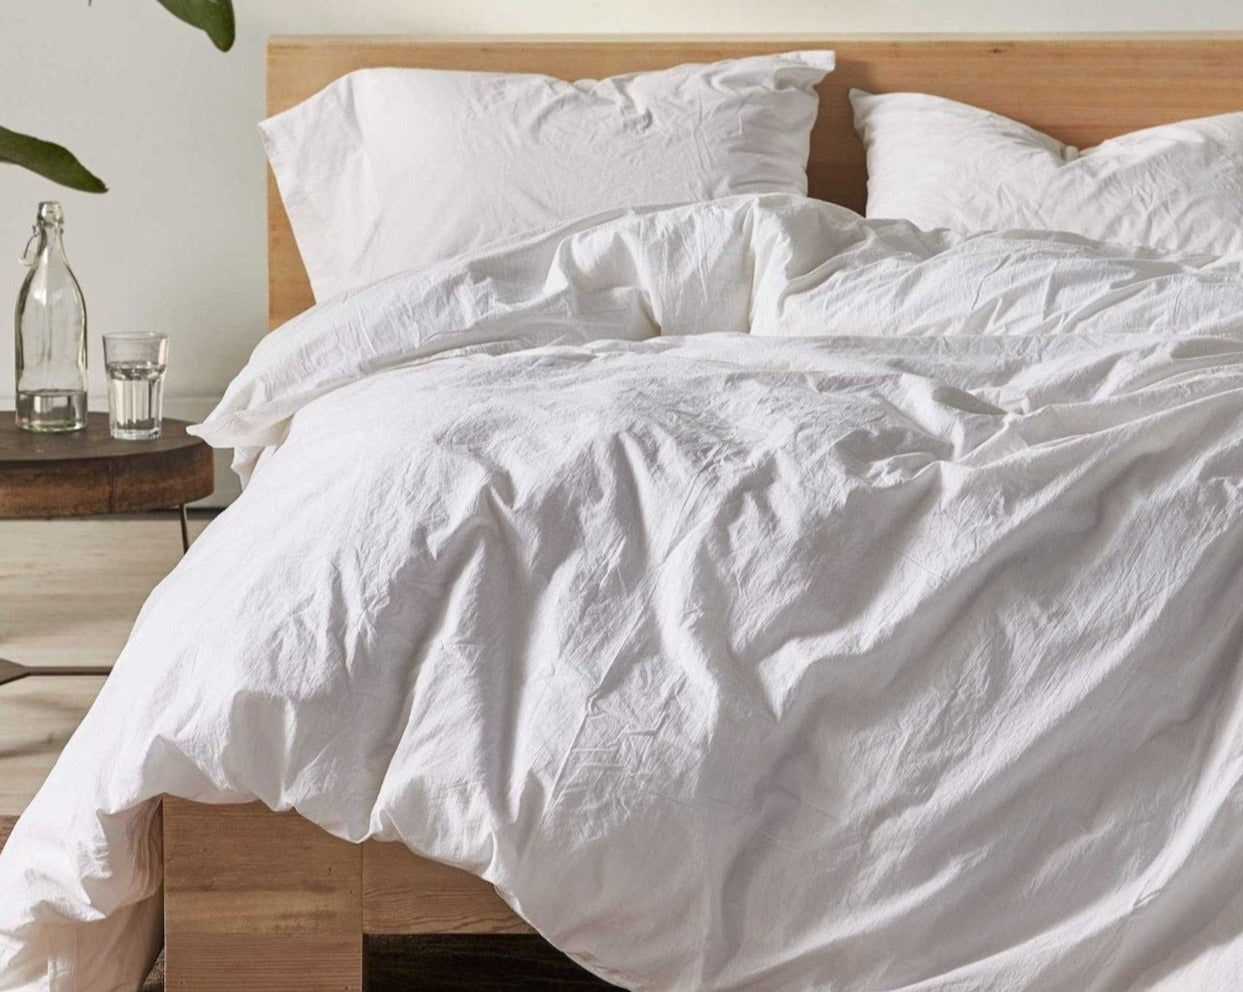 Organic Duvet Covers from Resthouse